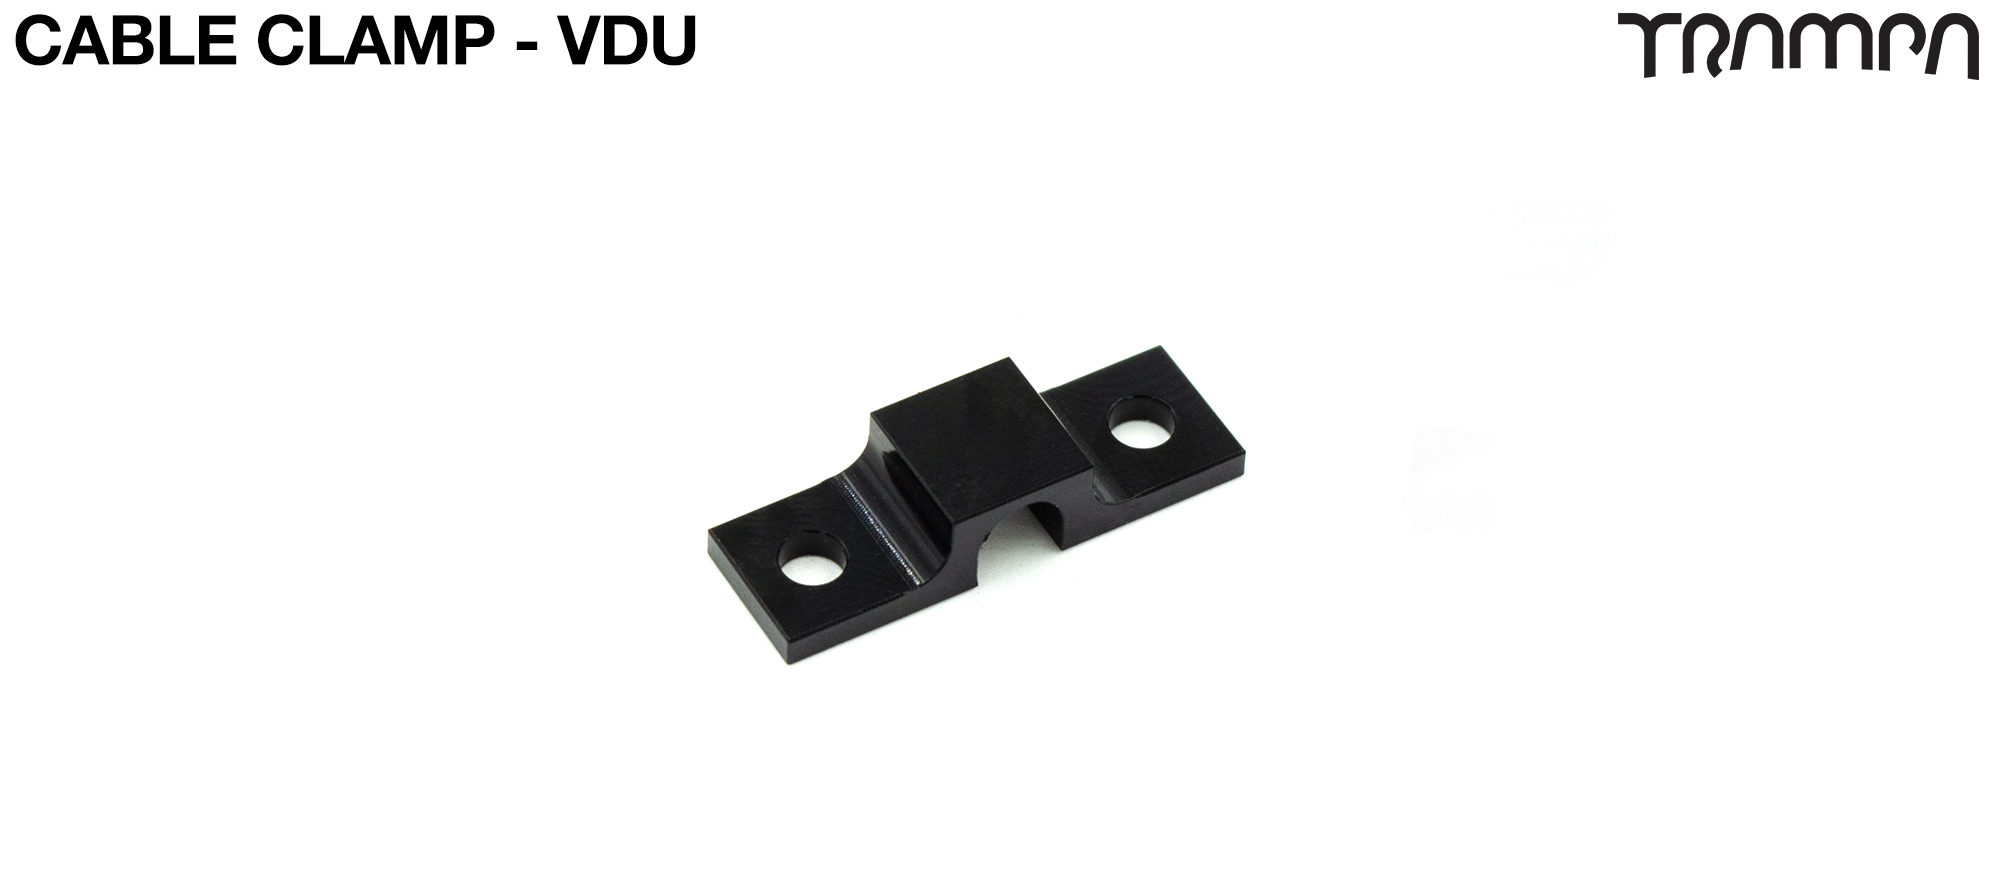 VESC DISPLAY UNIT - Cable Clamp  